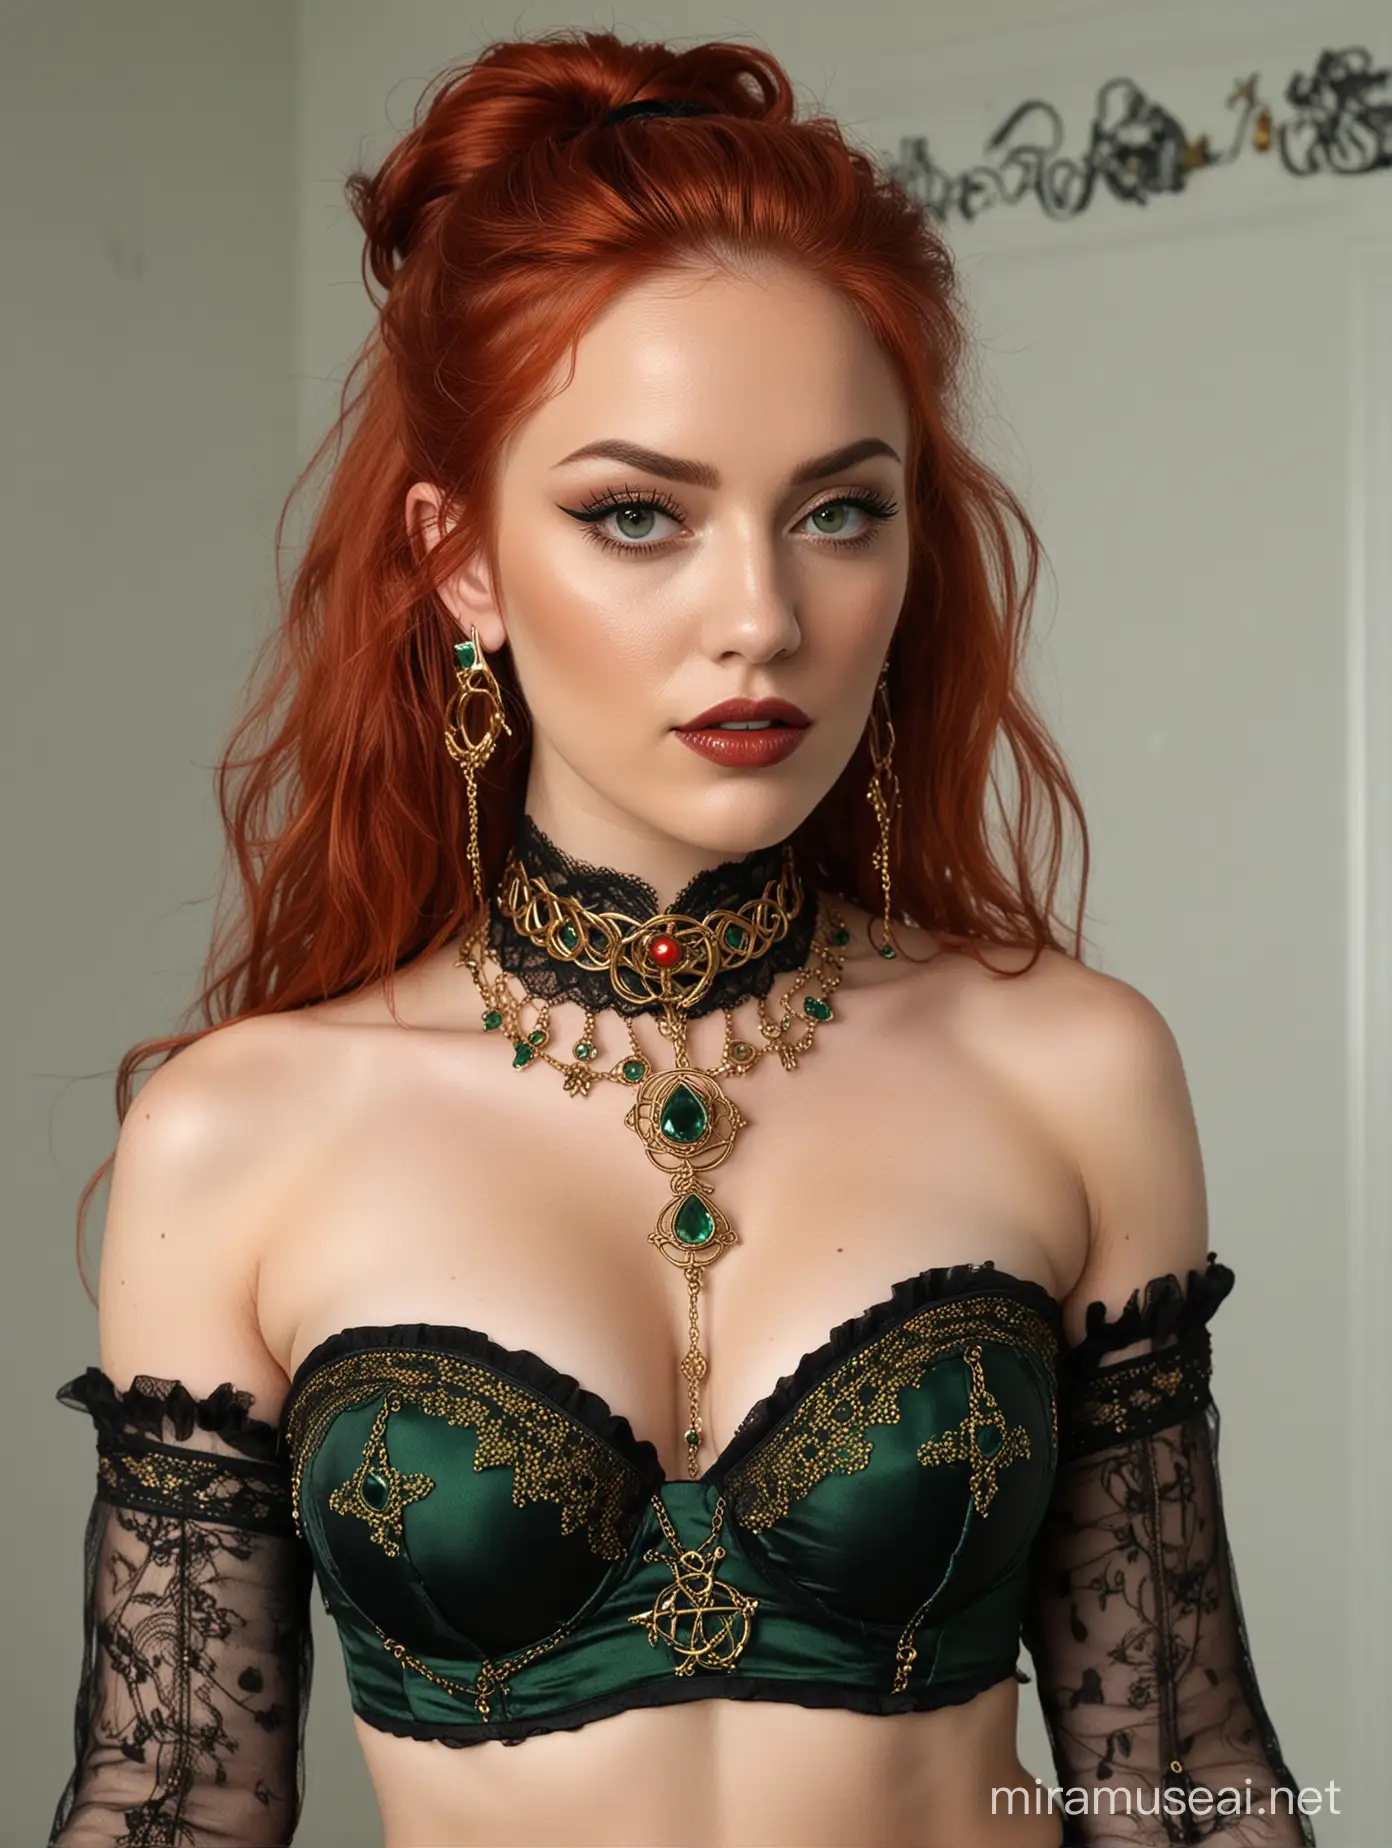 Sensual Woman in Vivid Green Corset and Gold Jewelry on Marble Floor